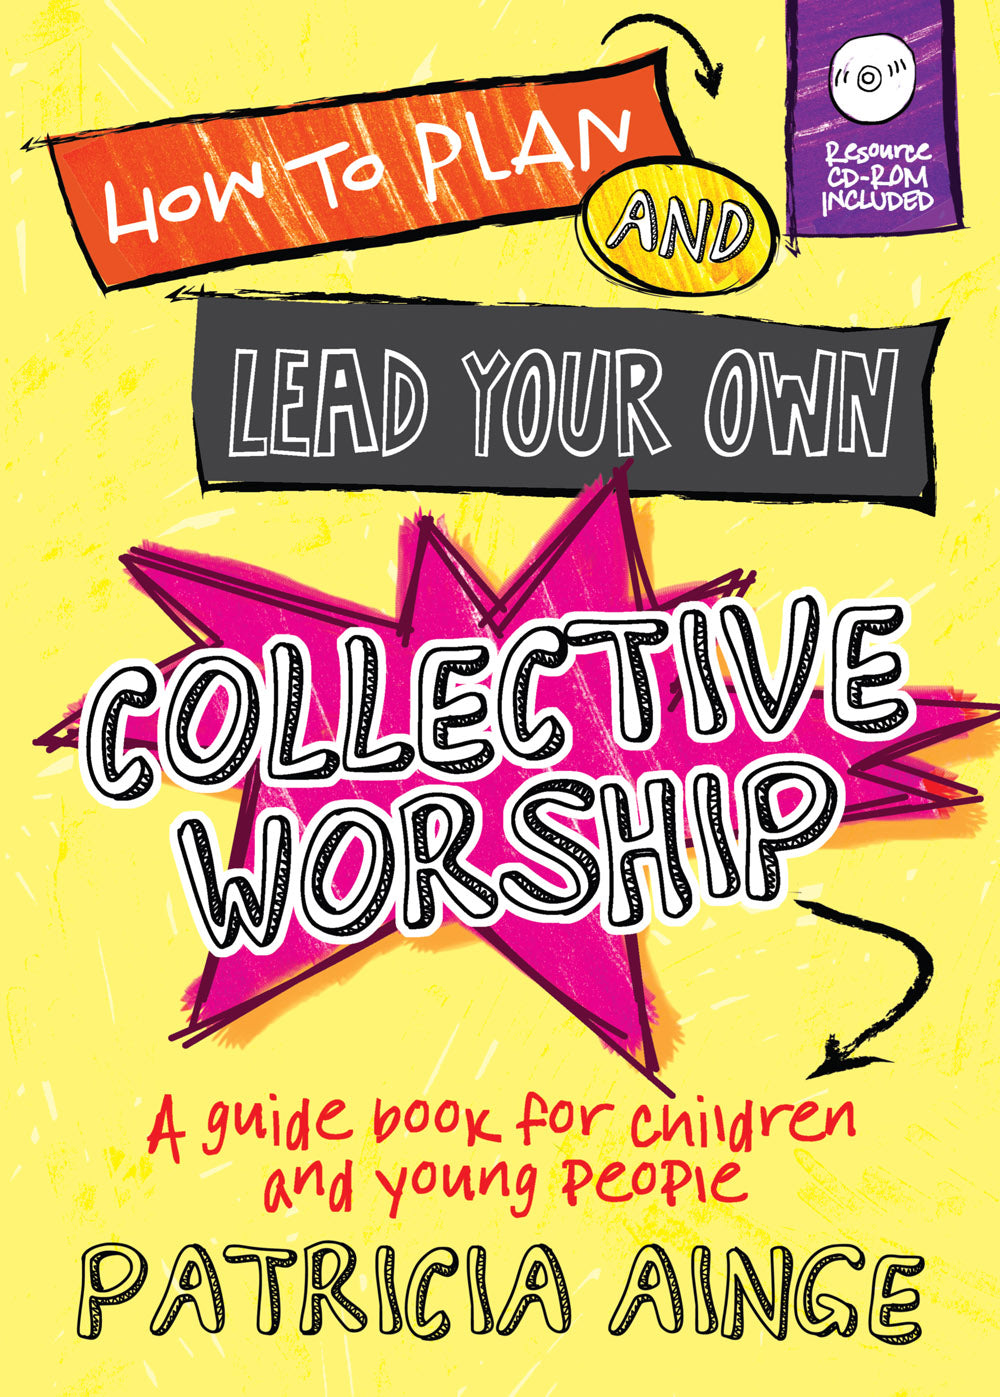 How To Plan And Lead Your Own Collective Worship + Cd RomHow To Plan And Lead Your Own Collective Worship + Cd Rom